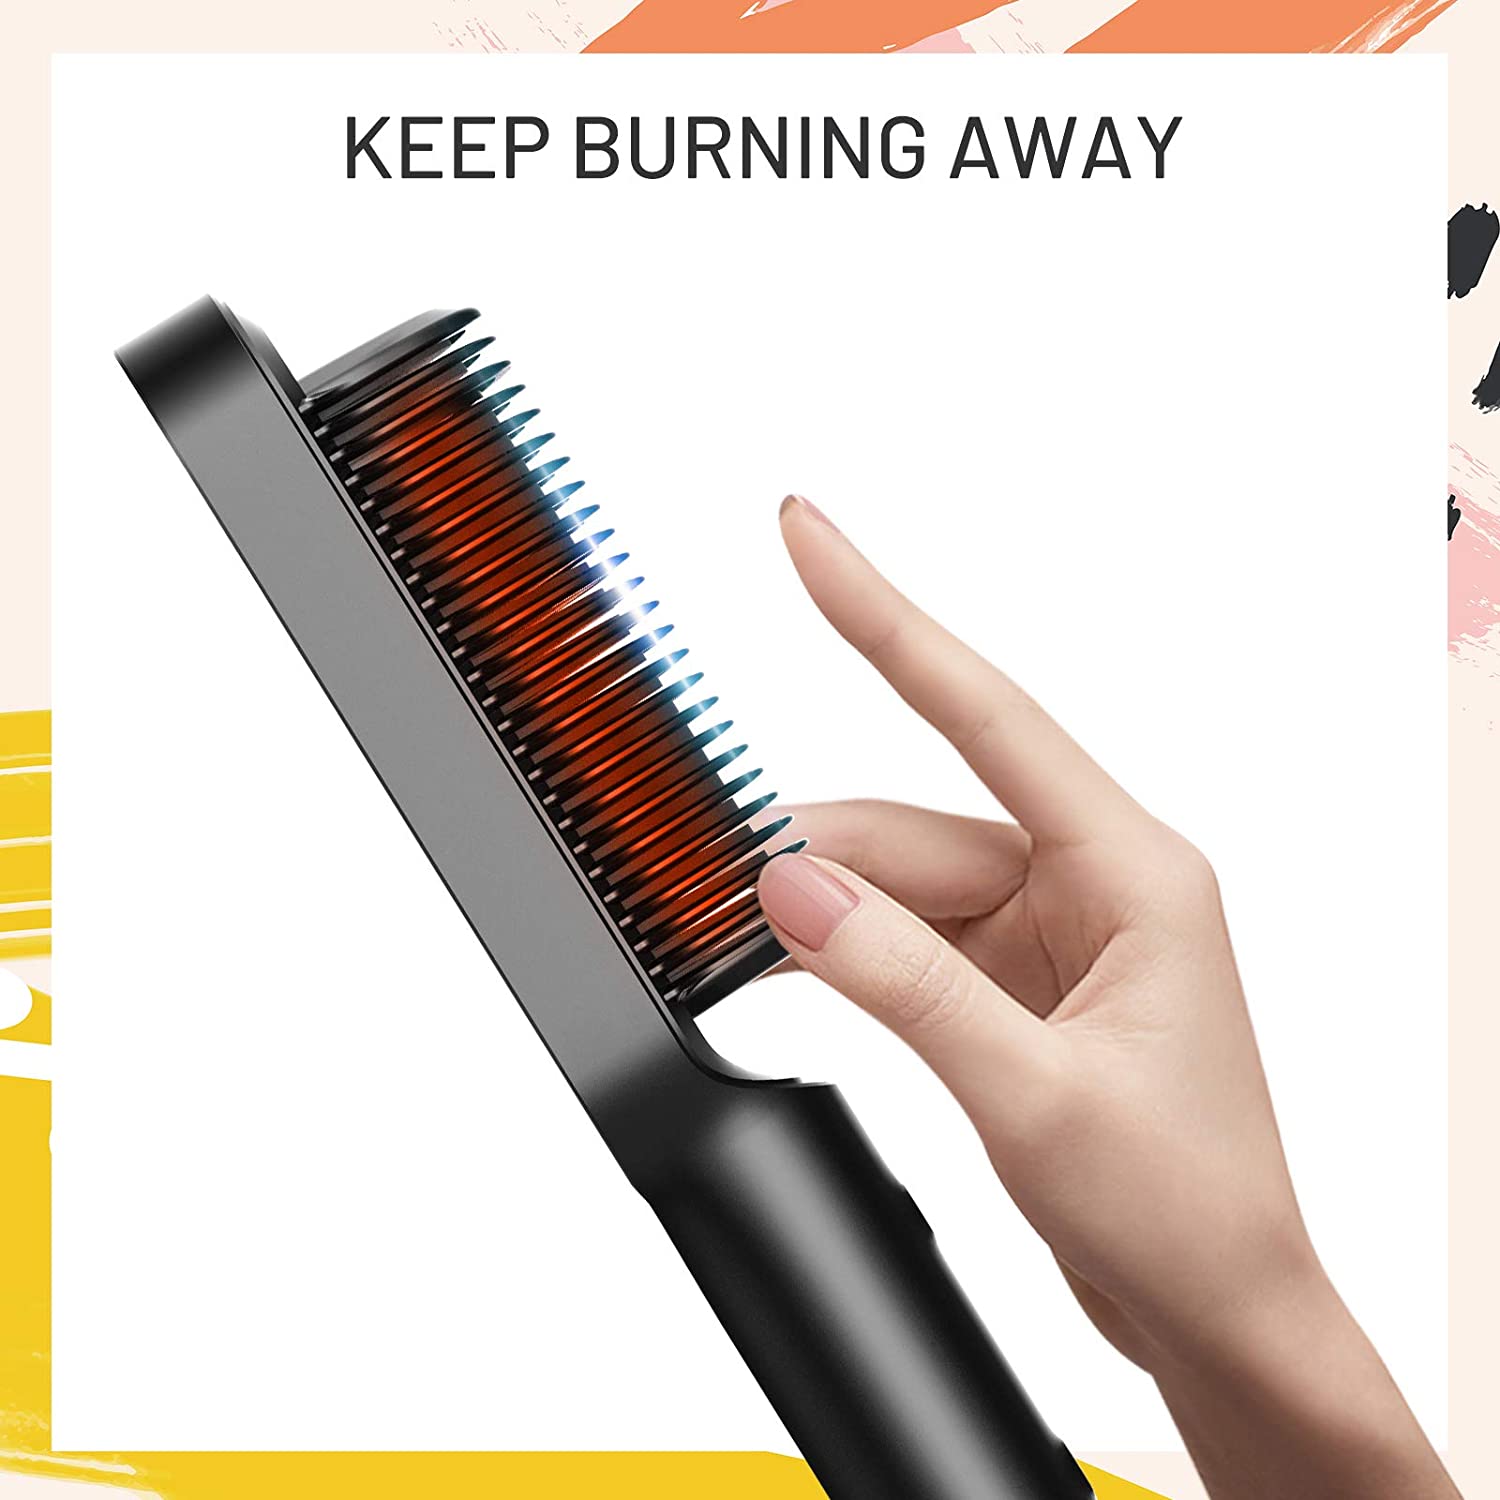 Hair Straightener Brush -2 in 1, the easiest way to style your hair ,Red - Brilliance New York Online